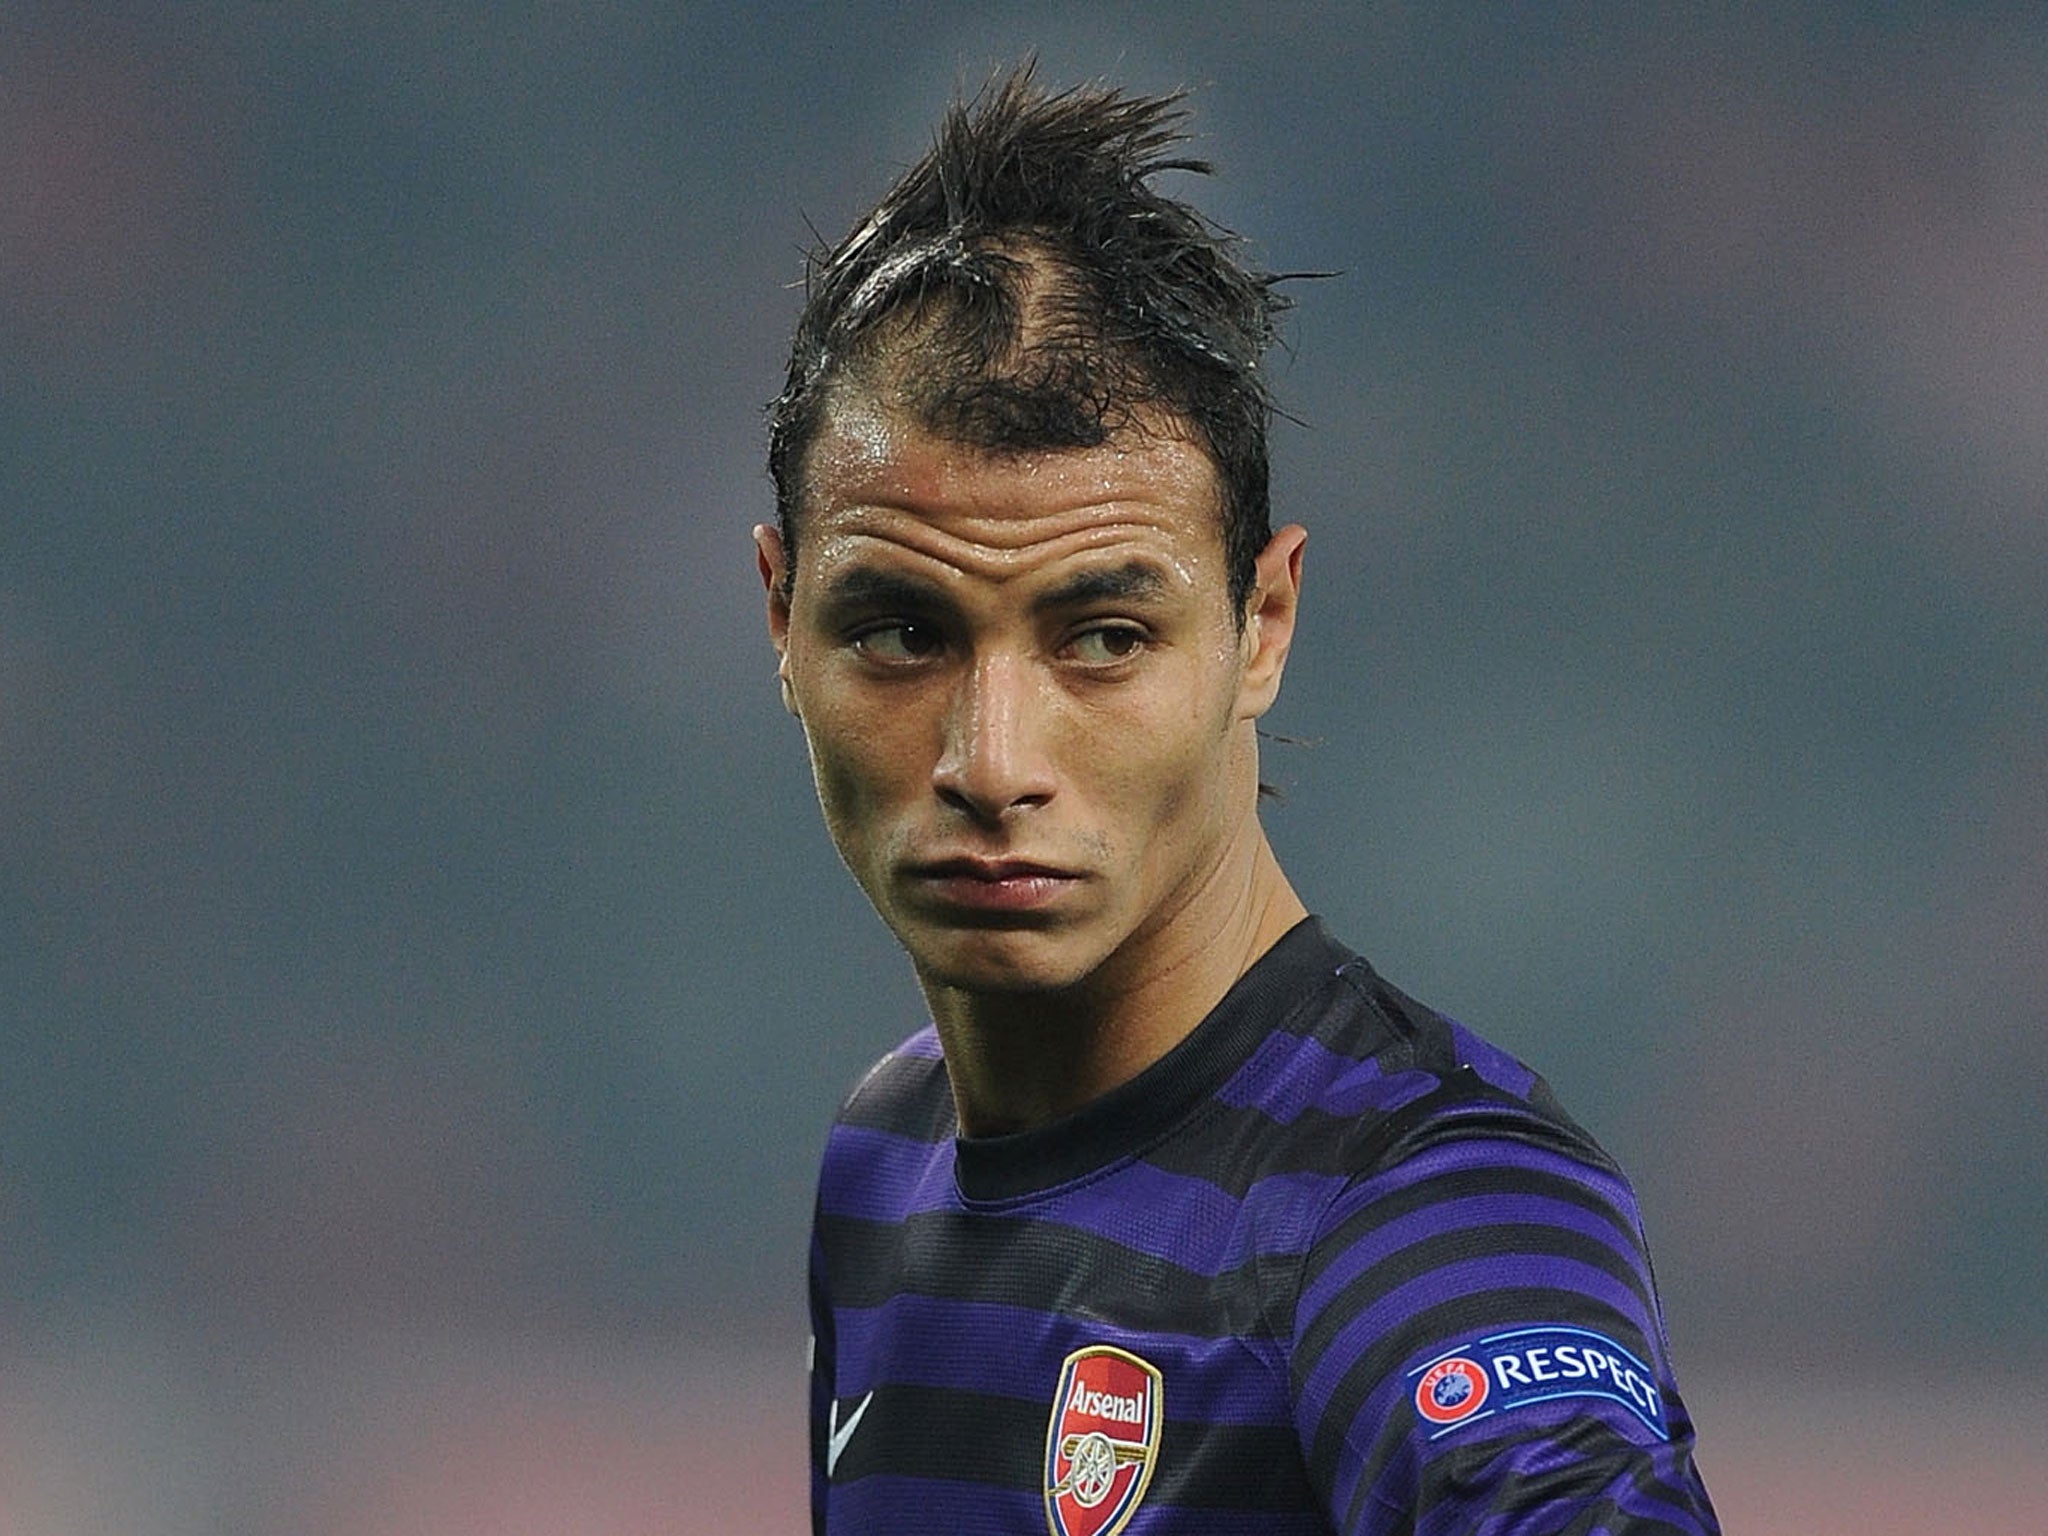 Marouane Chamakh scored 14 goals in 67 appearances for Arsenal